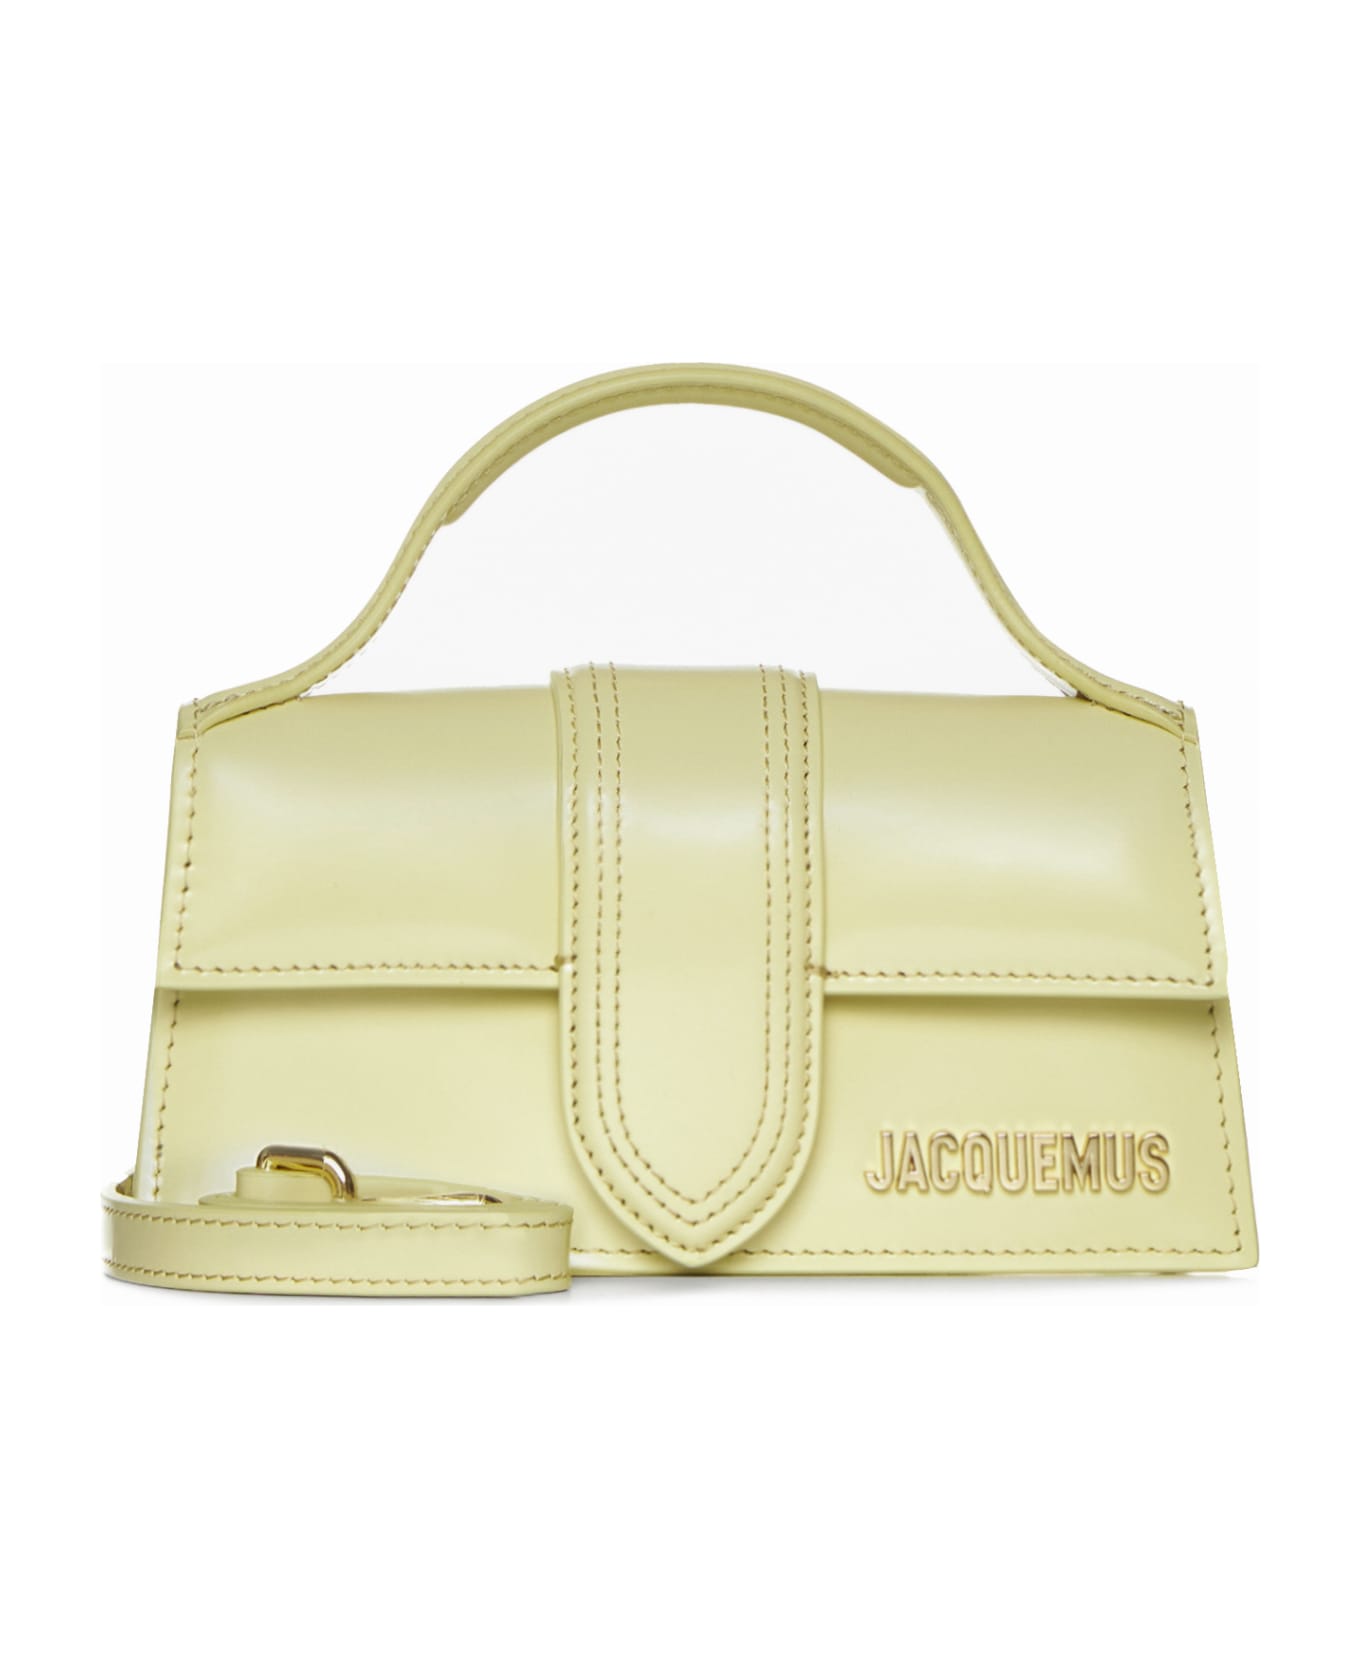 Jacquemus Tote - Pale yellow